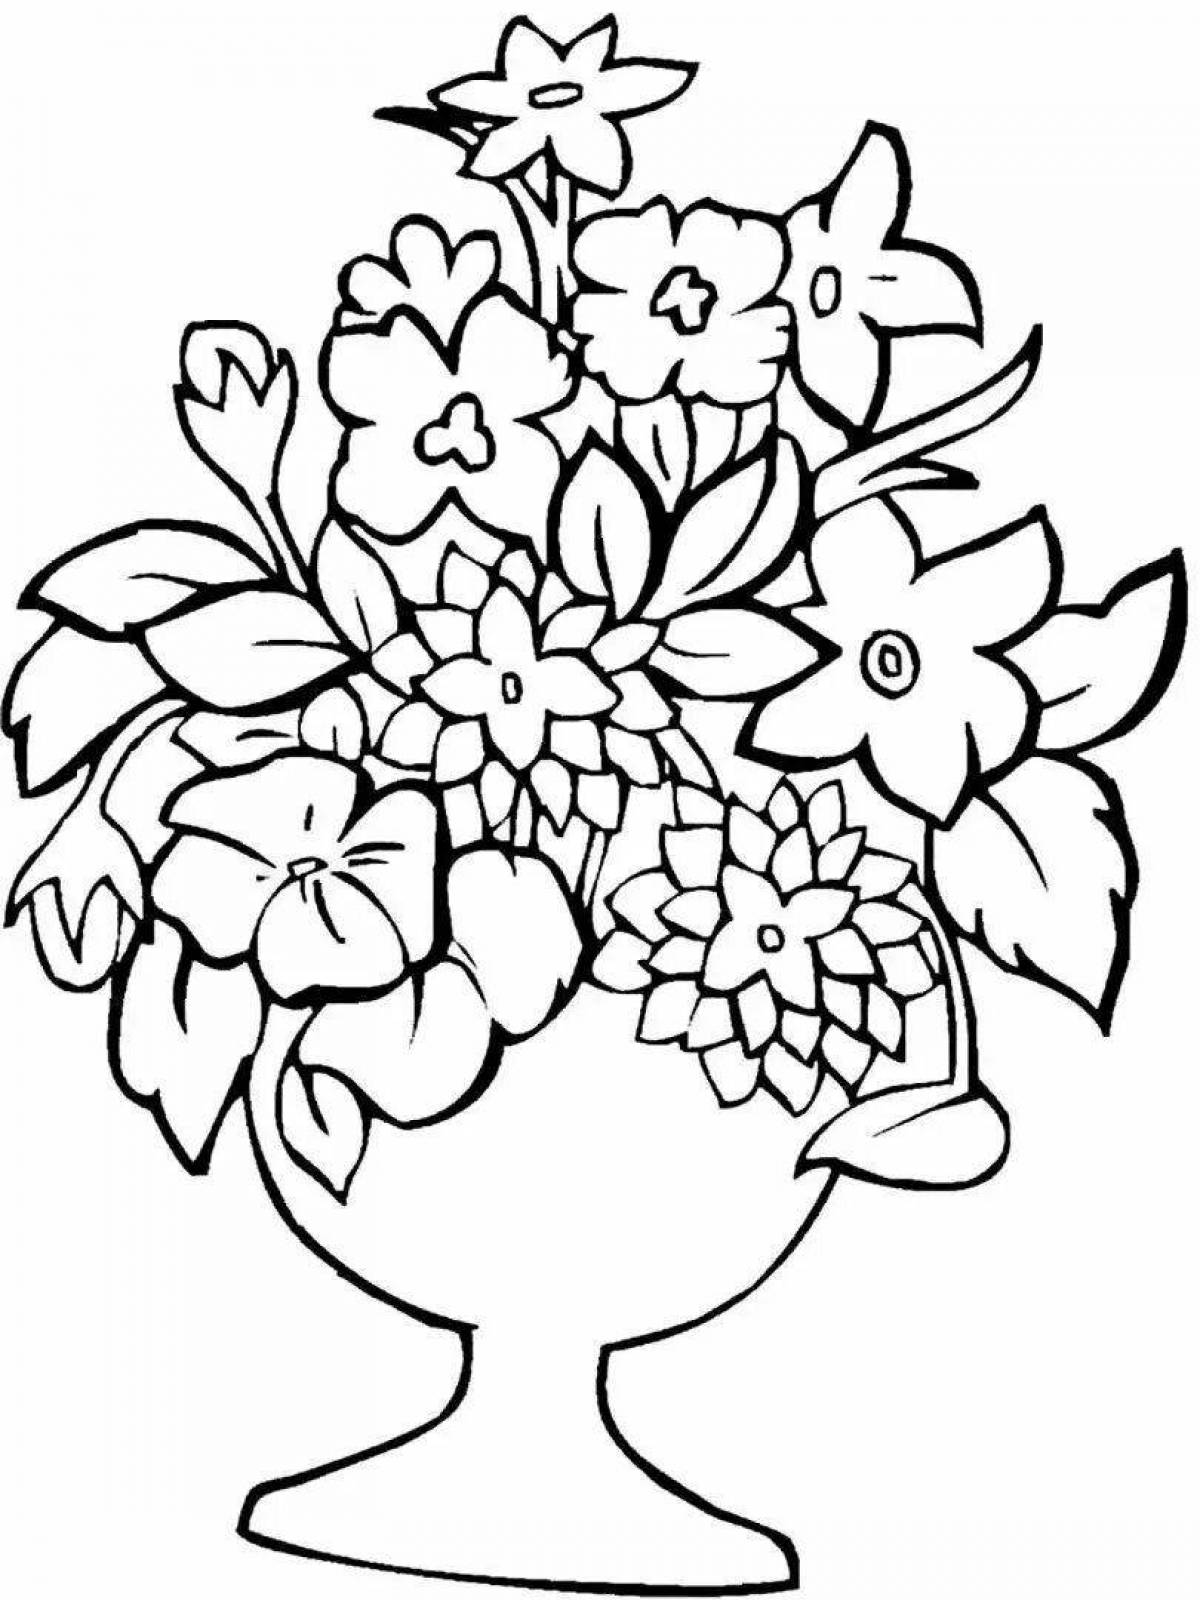 Colorful bright vase with flowers coloring book